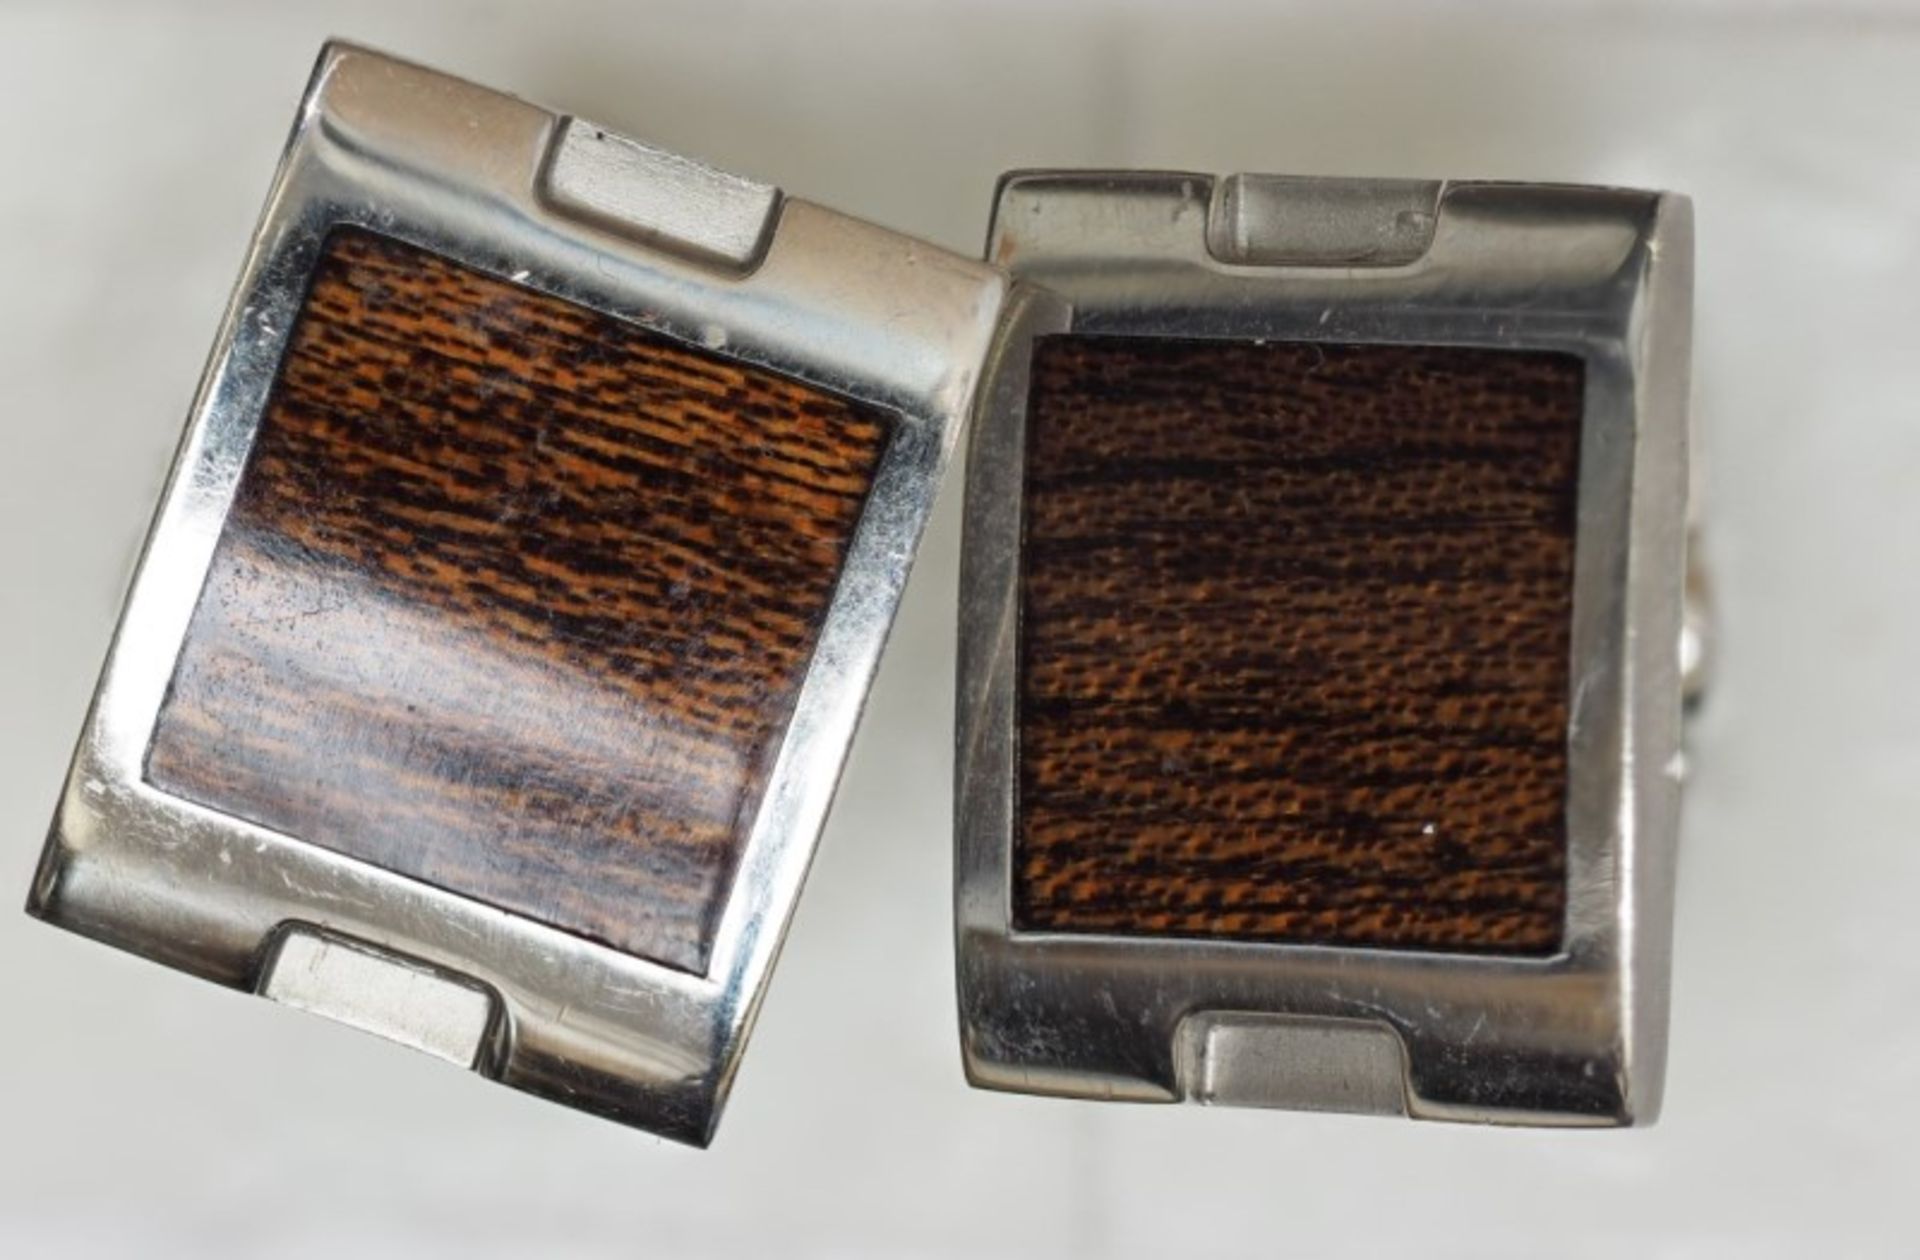 Stainless Steel /Wood Cuff Links Retail $120 - Image 2 of 2